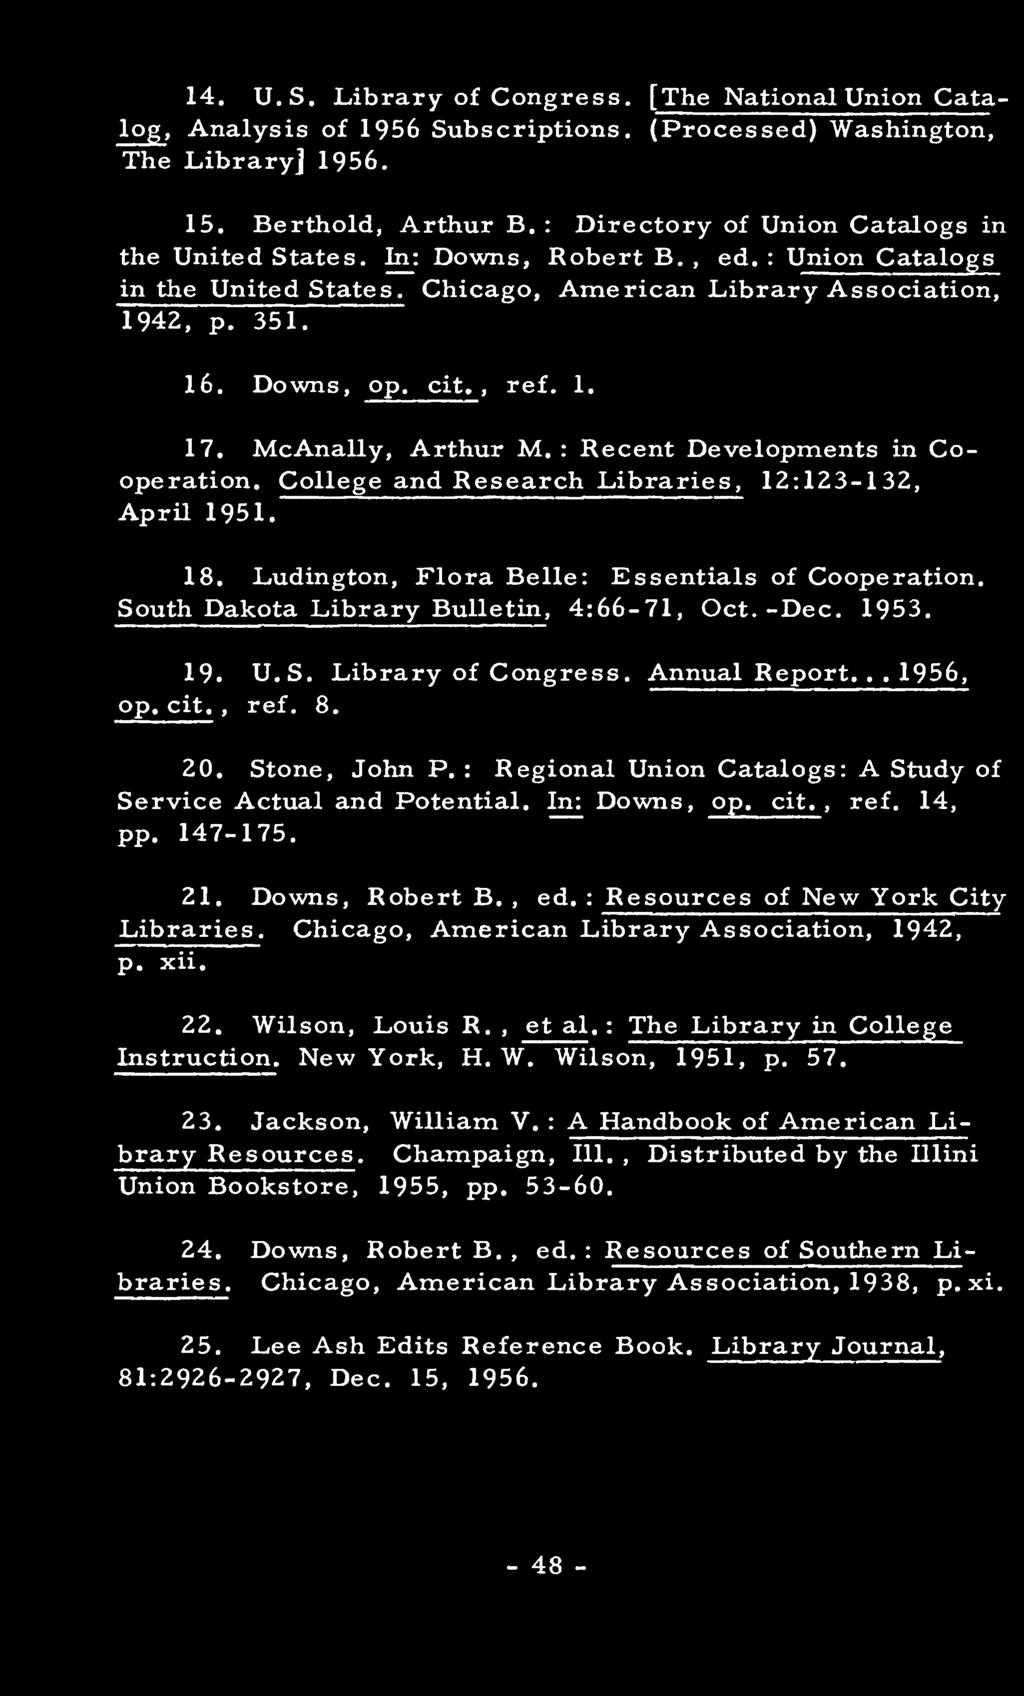 : Regional Union Catalogs: A Study of Service Actual and Potential. In: Downs, op. cit., ref. 14, pp. 147-175. 21. Downs, Robert B., ed. : Resources of New York City Libraries.